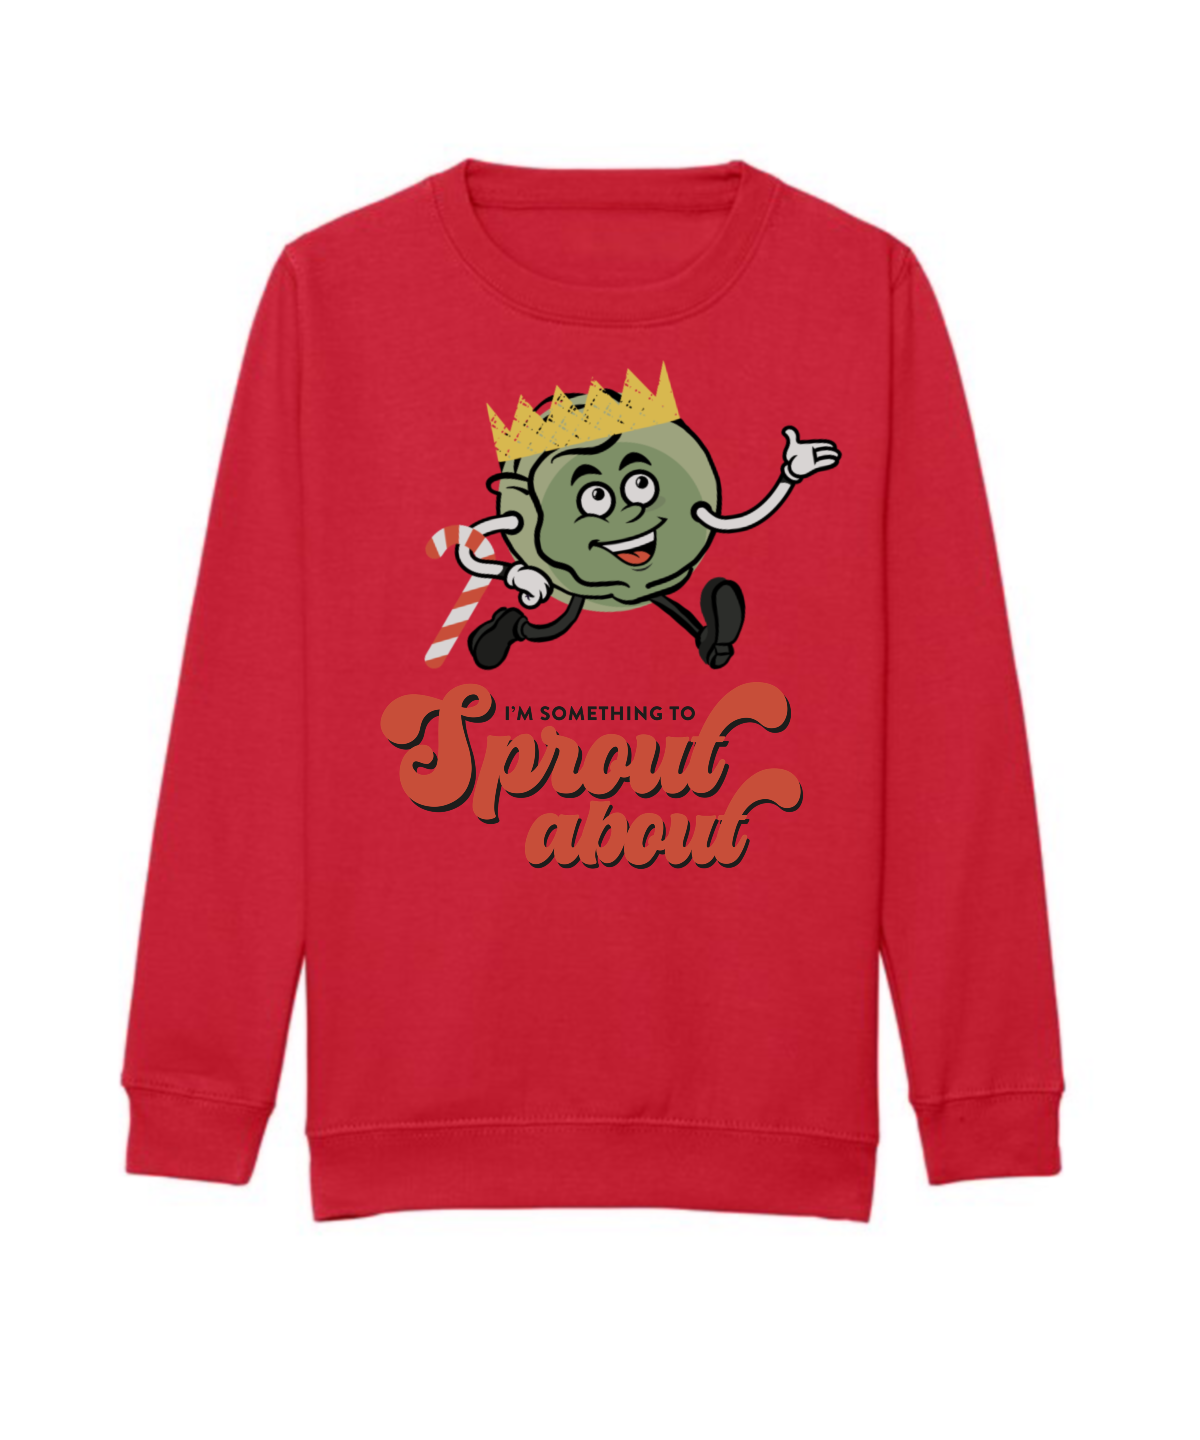 Sprout About Kids Christmas Sweatshirt in Red